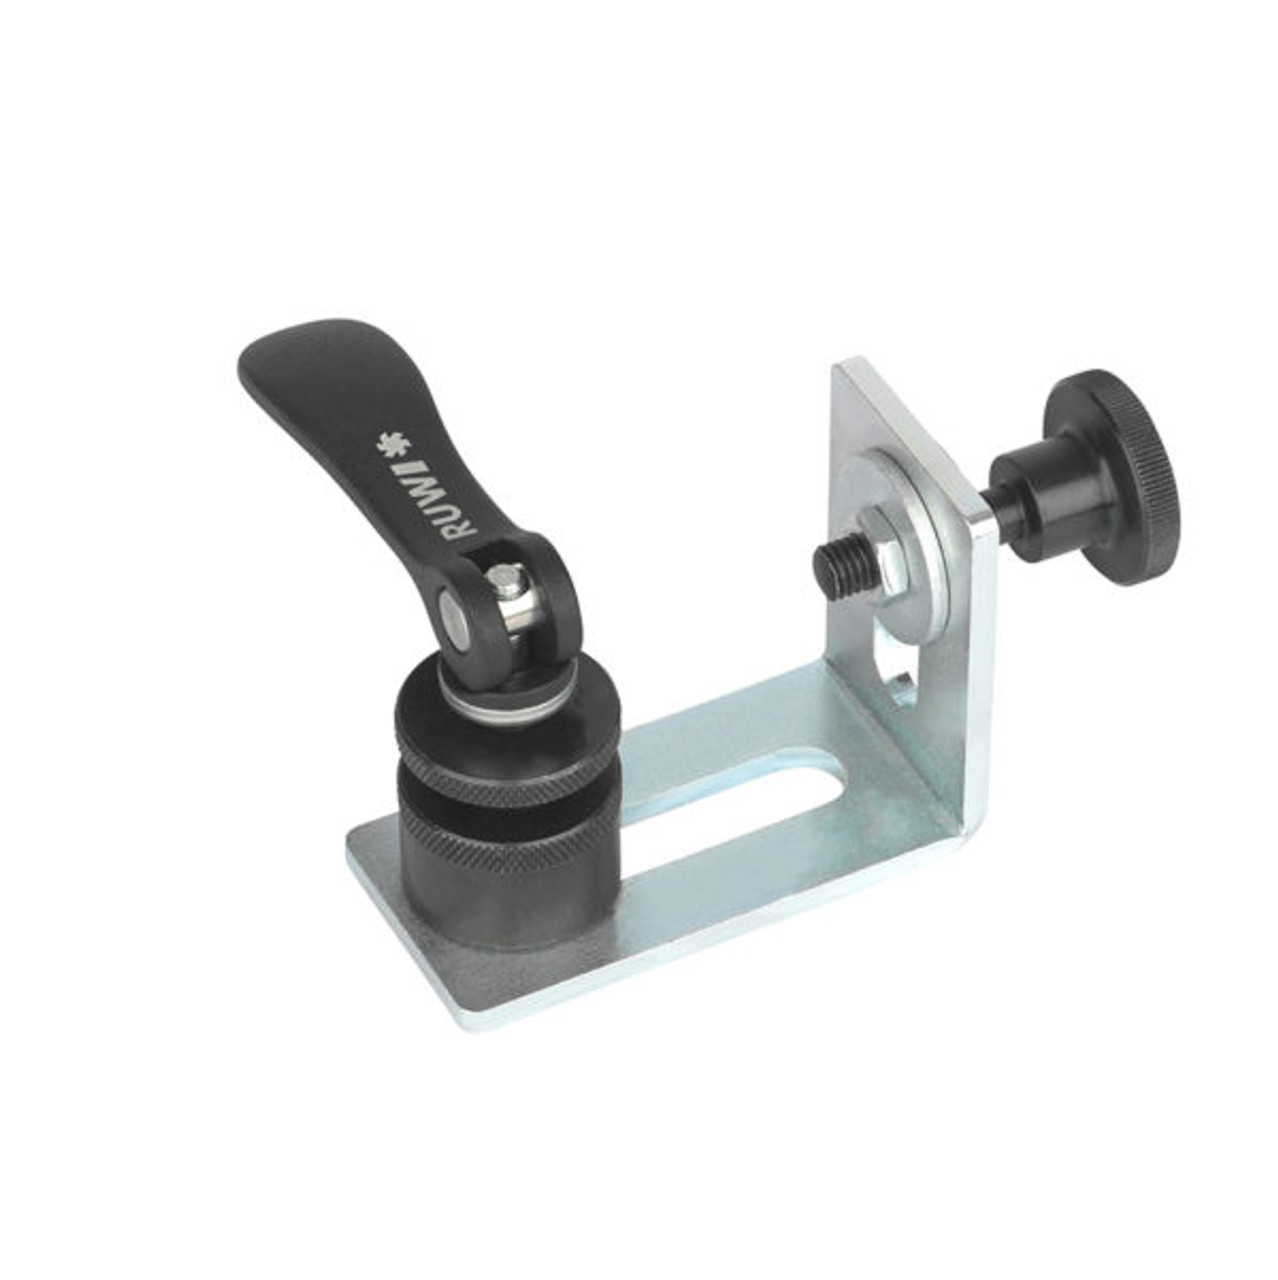 Buy Online a Clamp from RUWI 8mm Groove and Position Angle Set with Quick Release for the Cabinet Making and Woodworking Industry and Carpenters in Australia and New Zealand